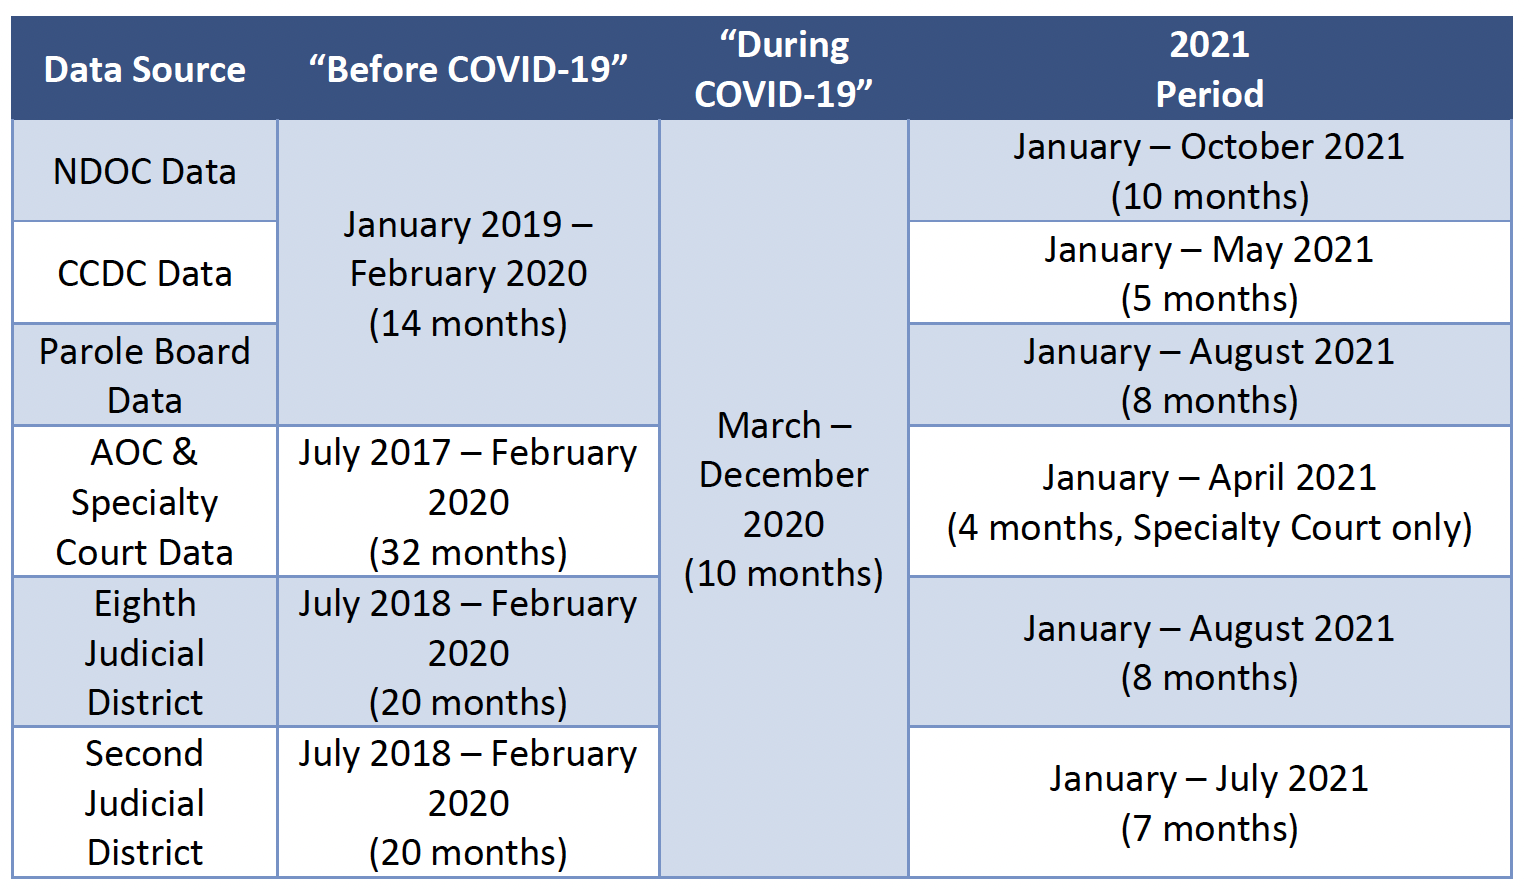 A view of date for periods defined as before and during COVID-19 or through 2021 based on data availability.